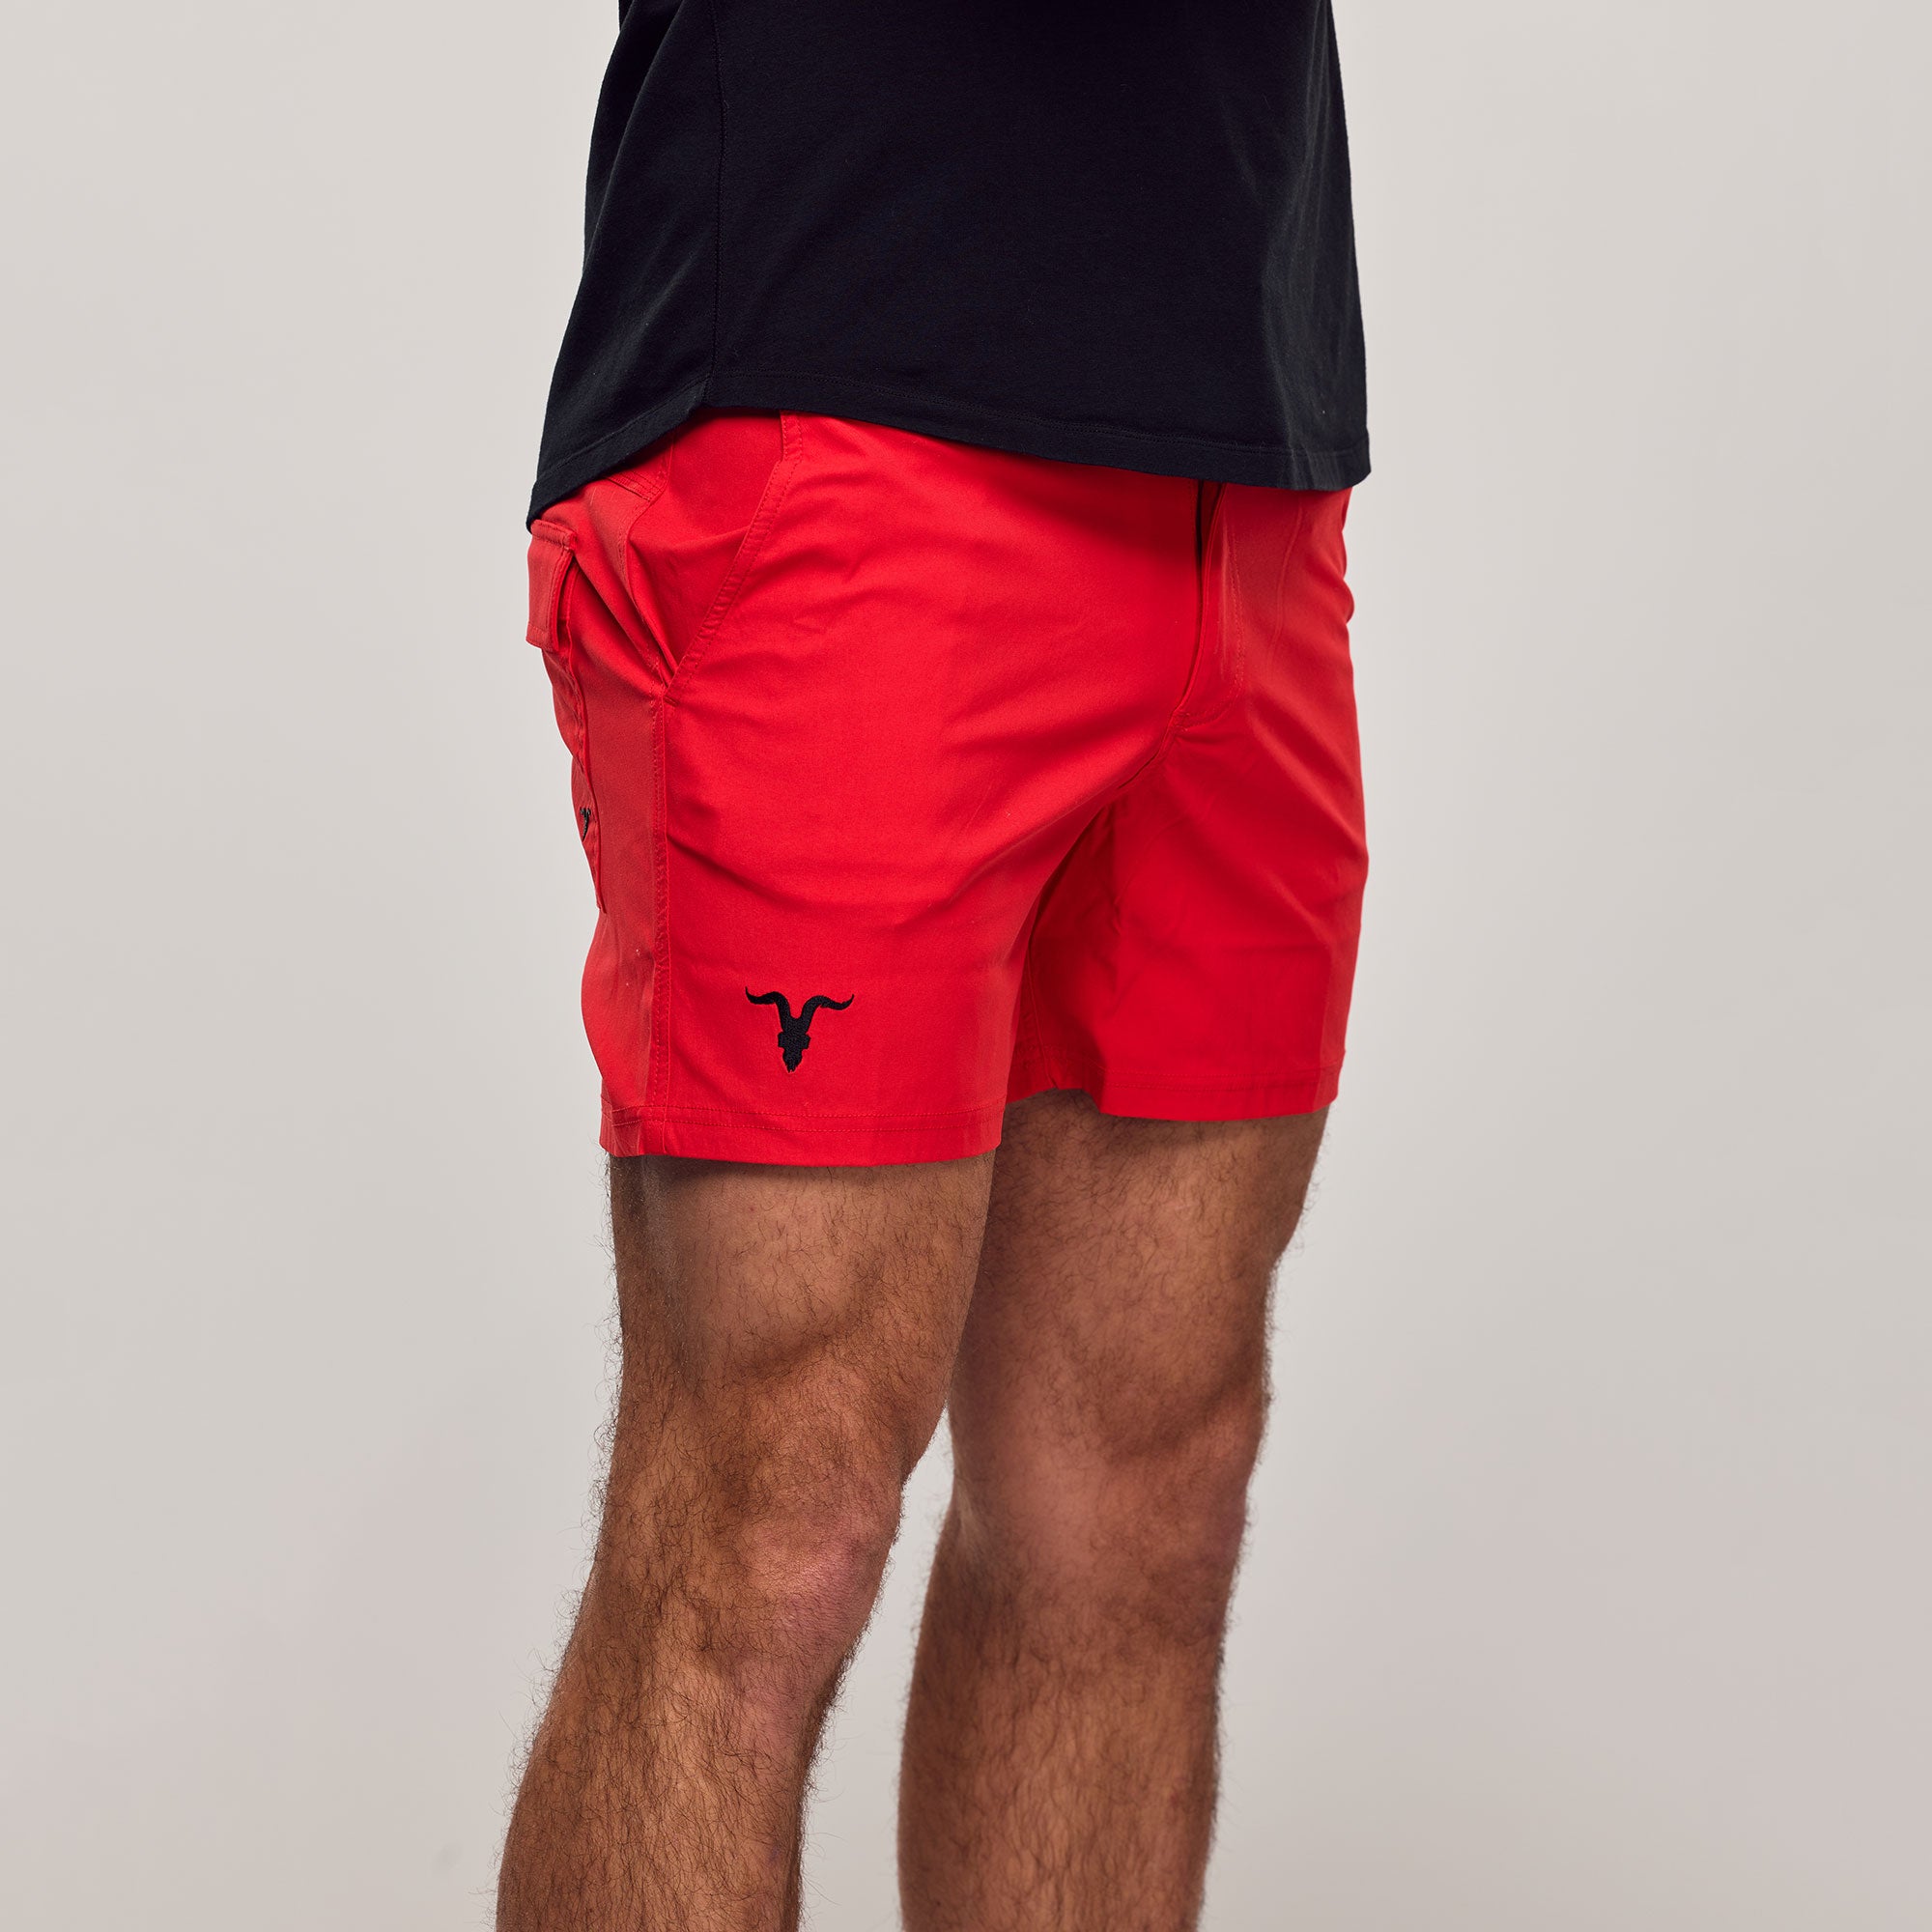 Men's Athletic Shorts in Red